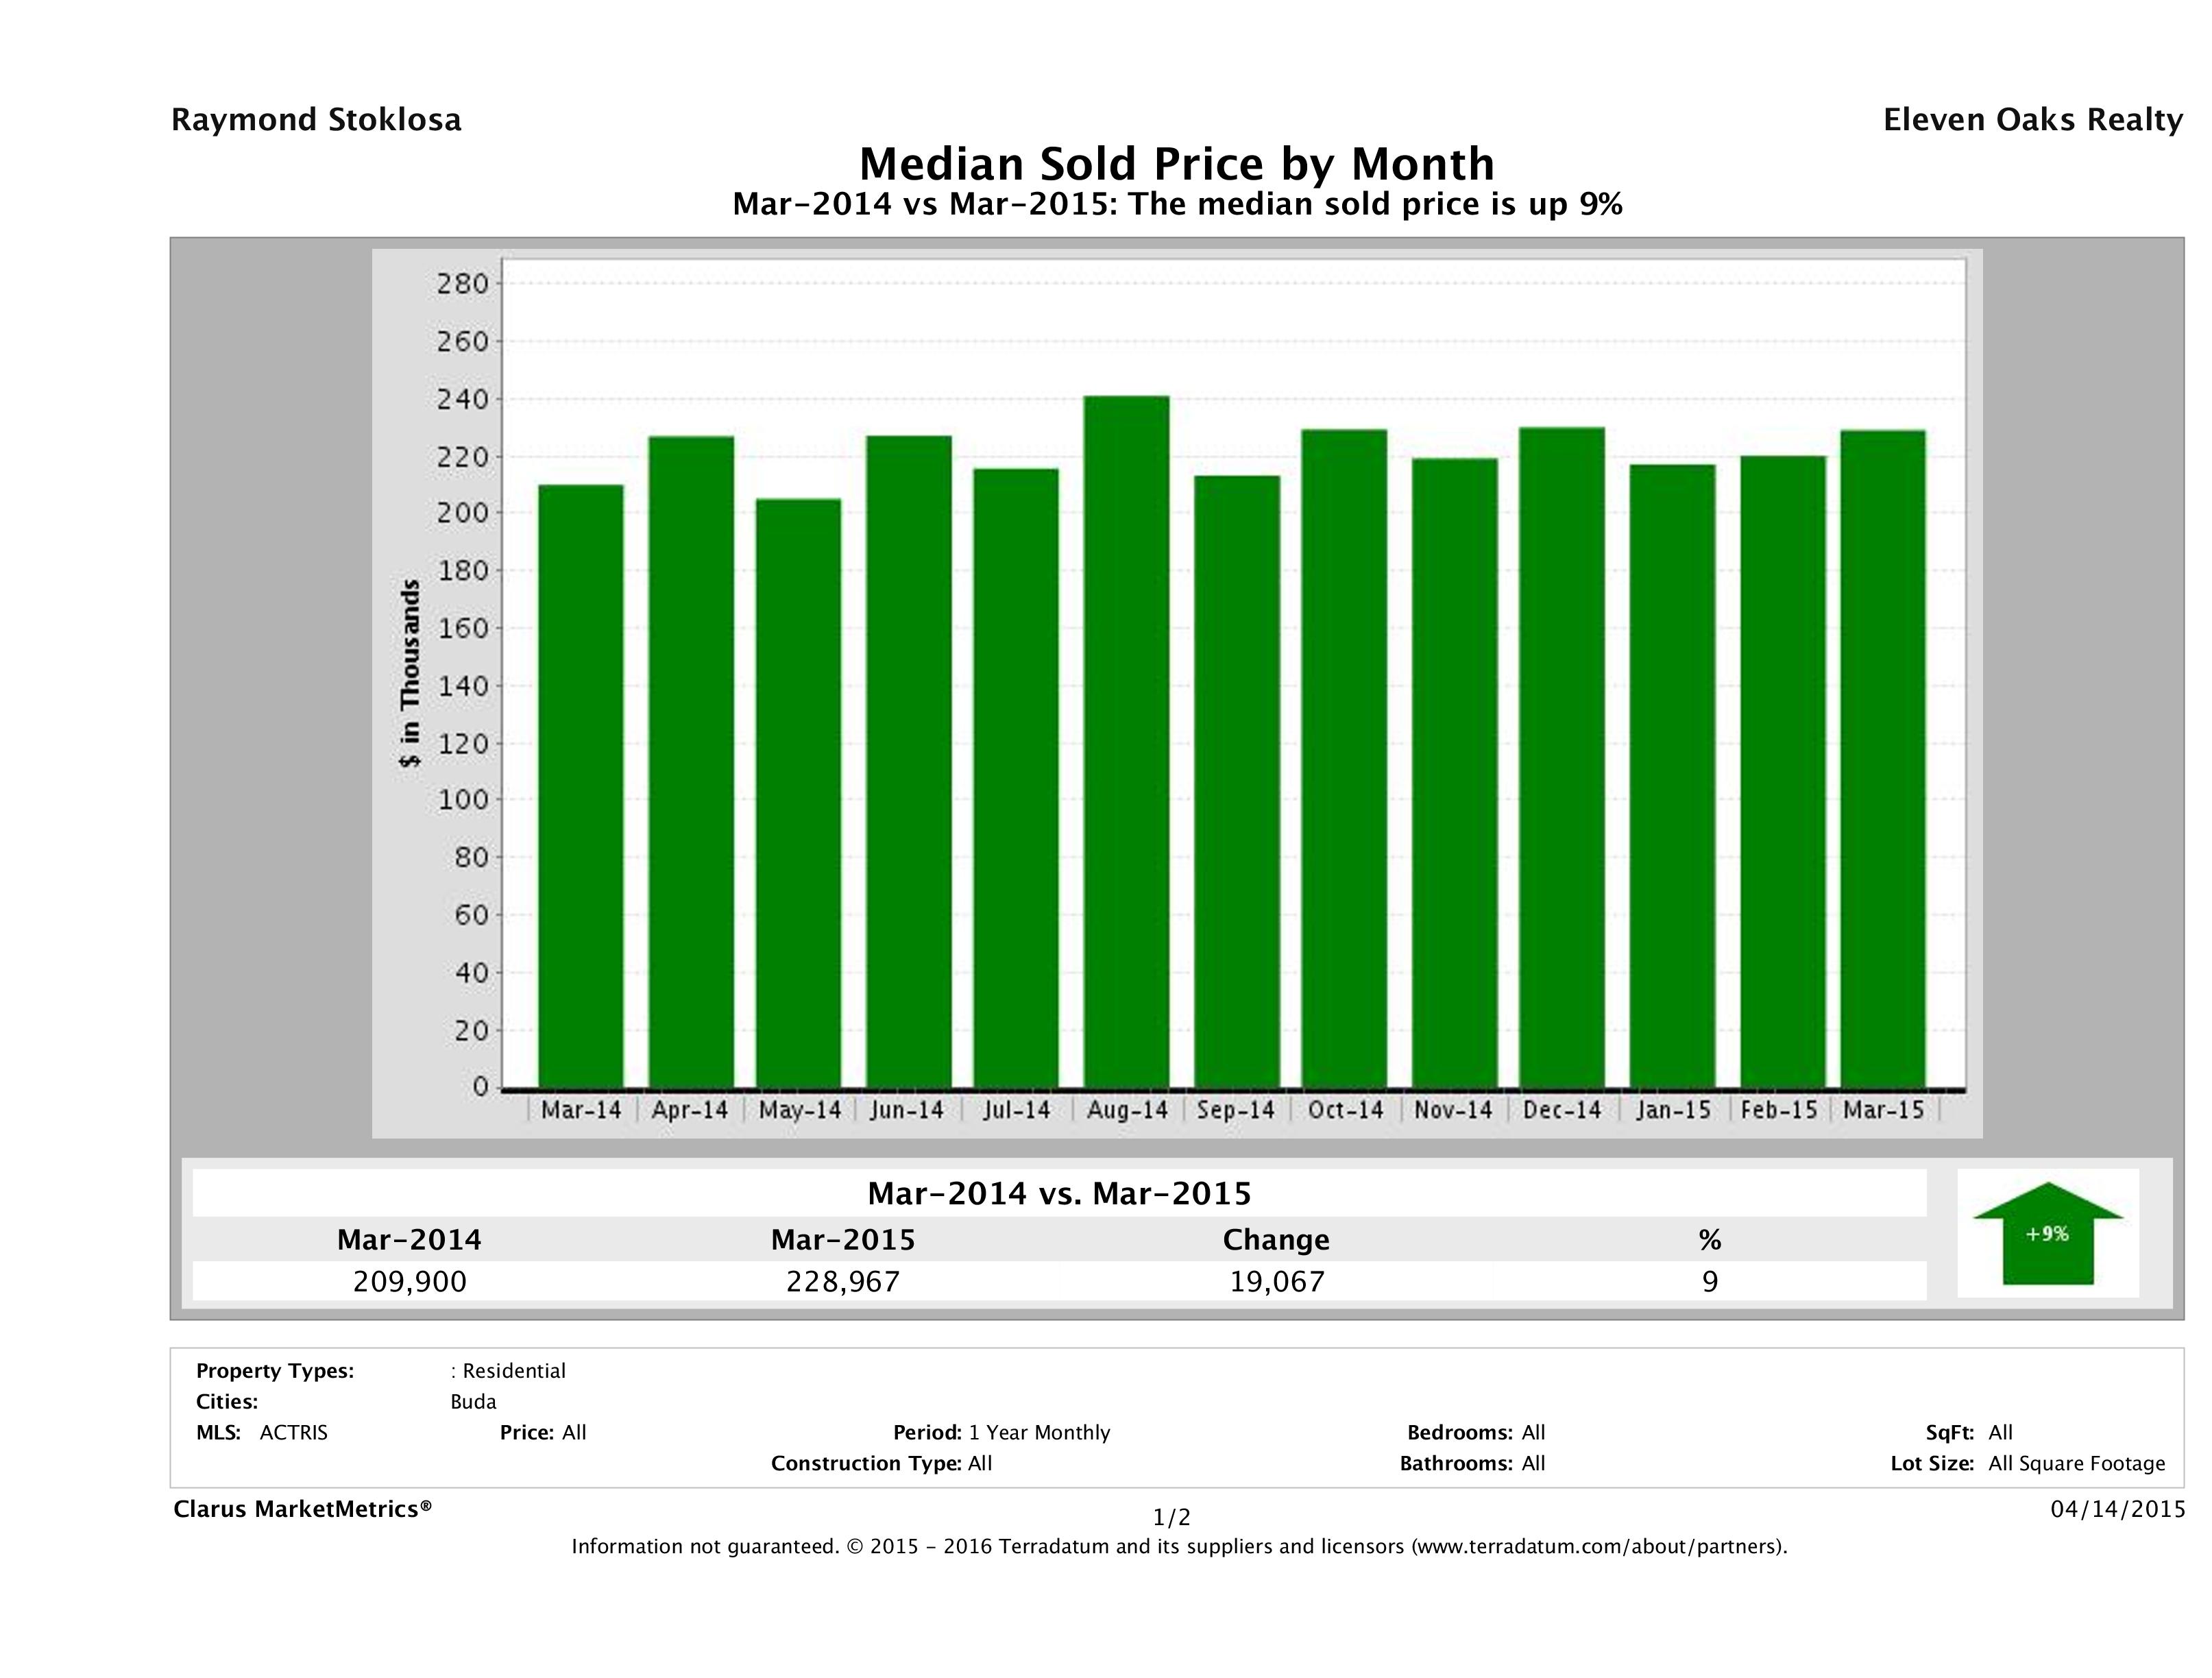 Buda median home price March 2015